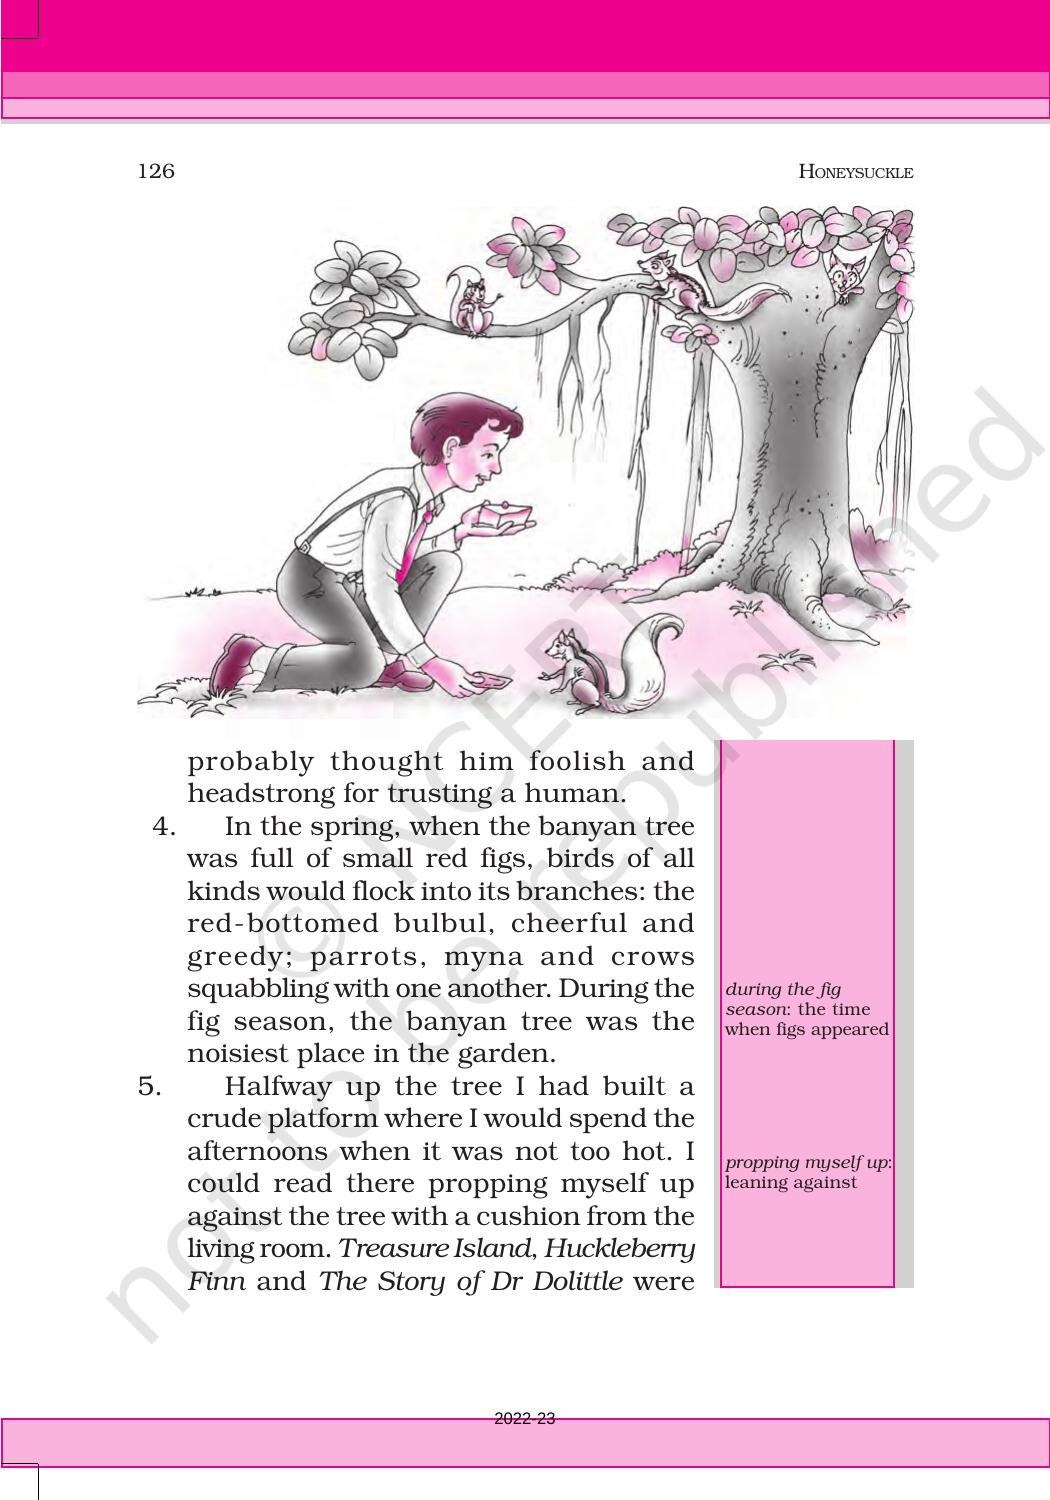 NCERT Book for Class 6 English(Honeysuckle) : Chapter 10-The Banyan Tree - Page 3